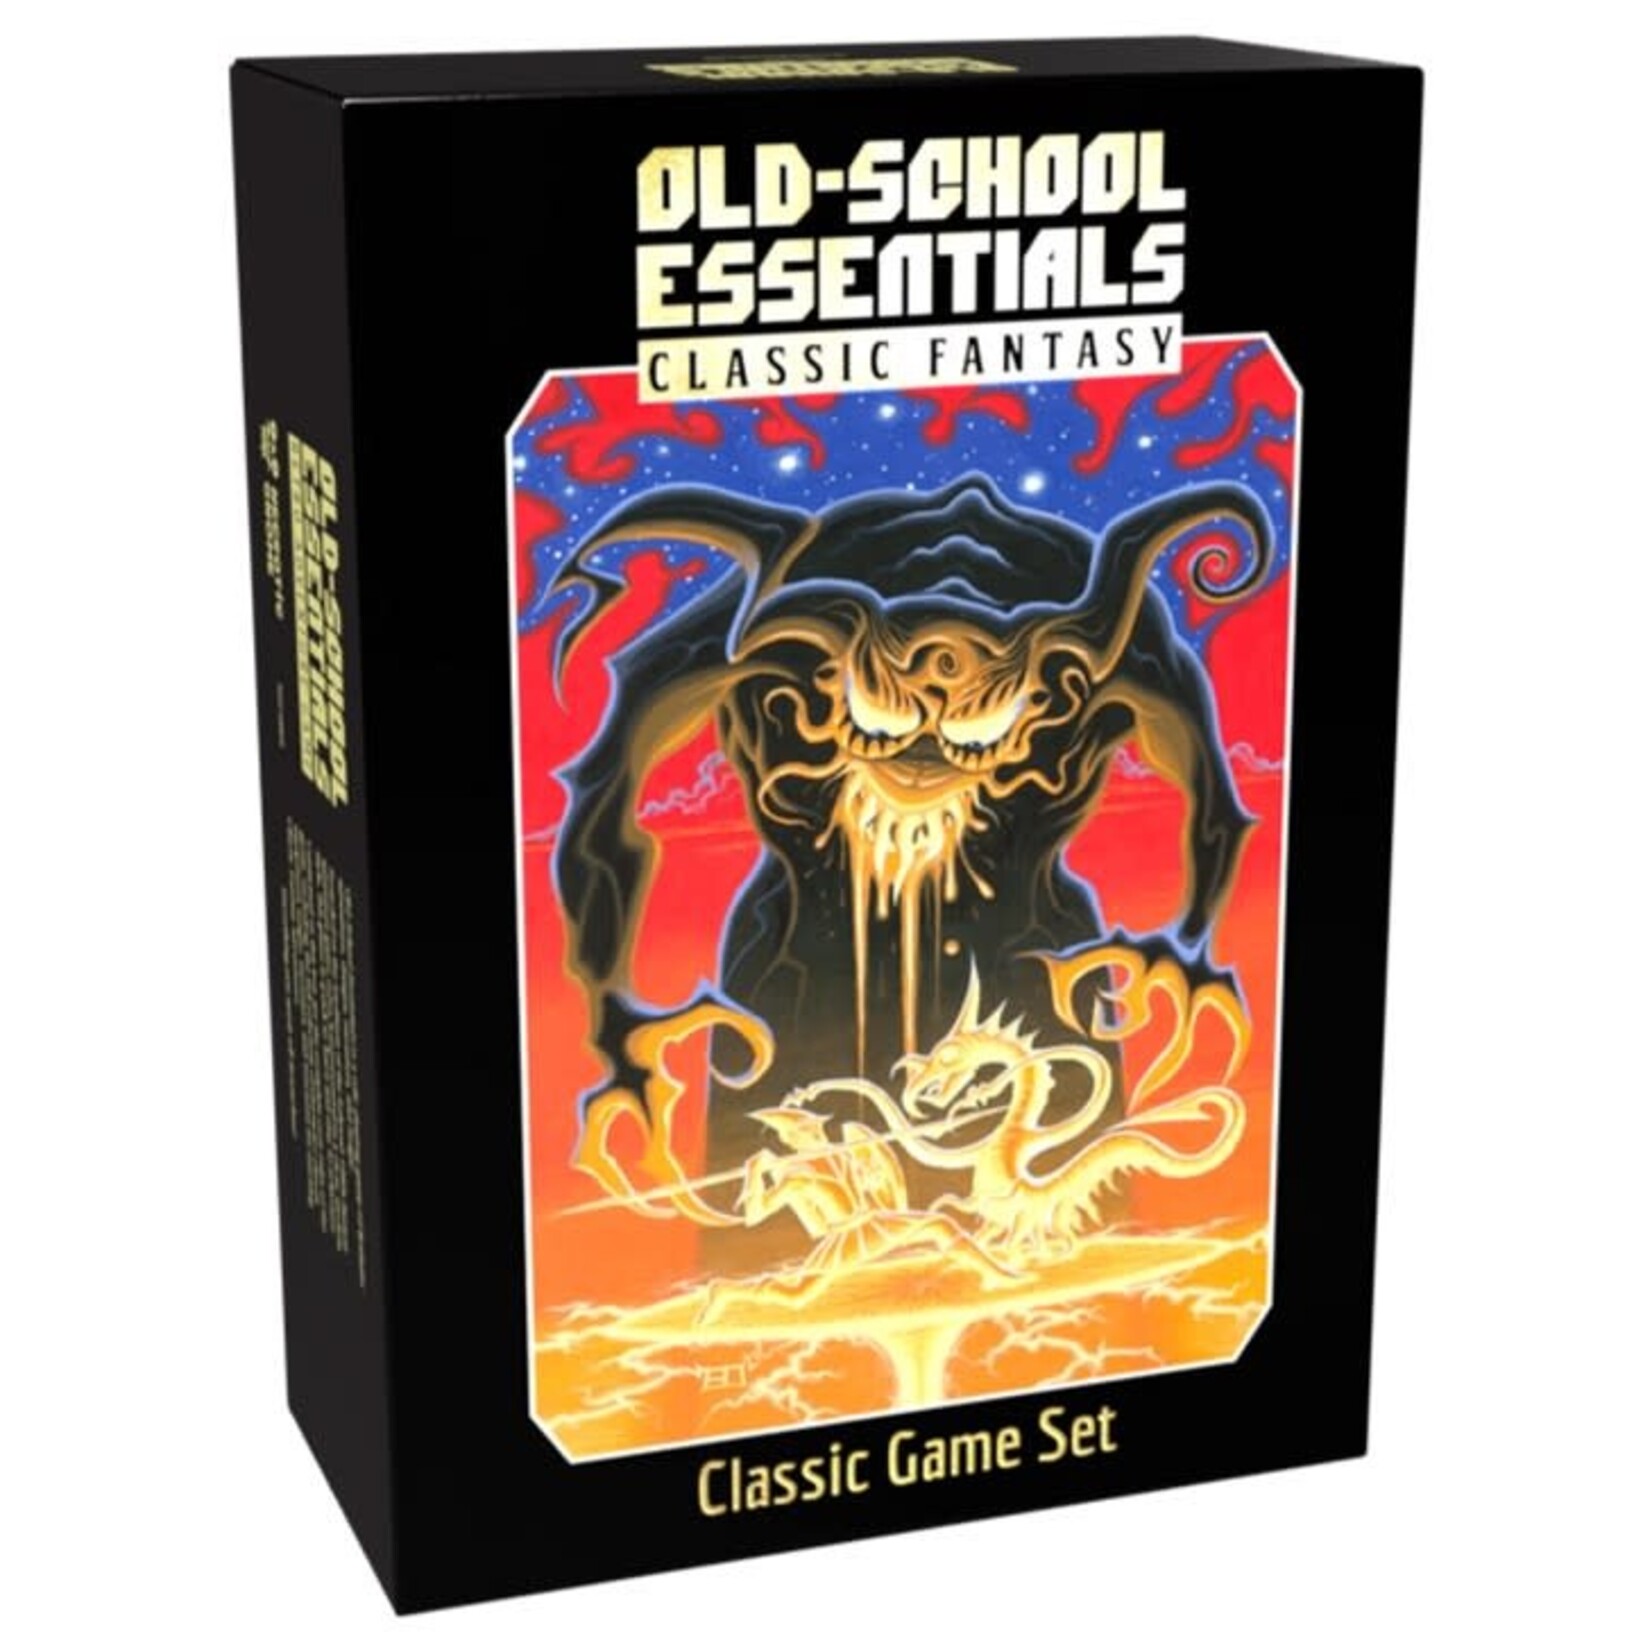 Exalted Funeral Press Old-School Essentials: Classic Fantasy Game Set